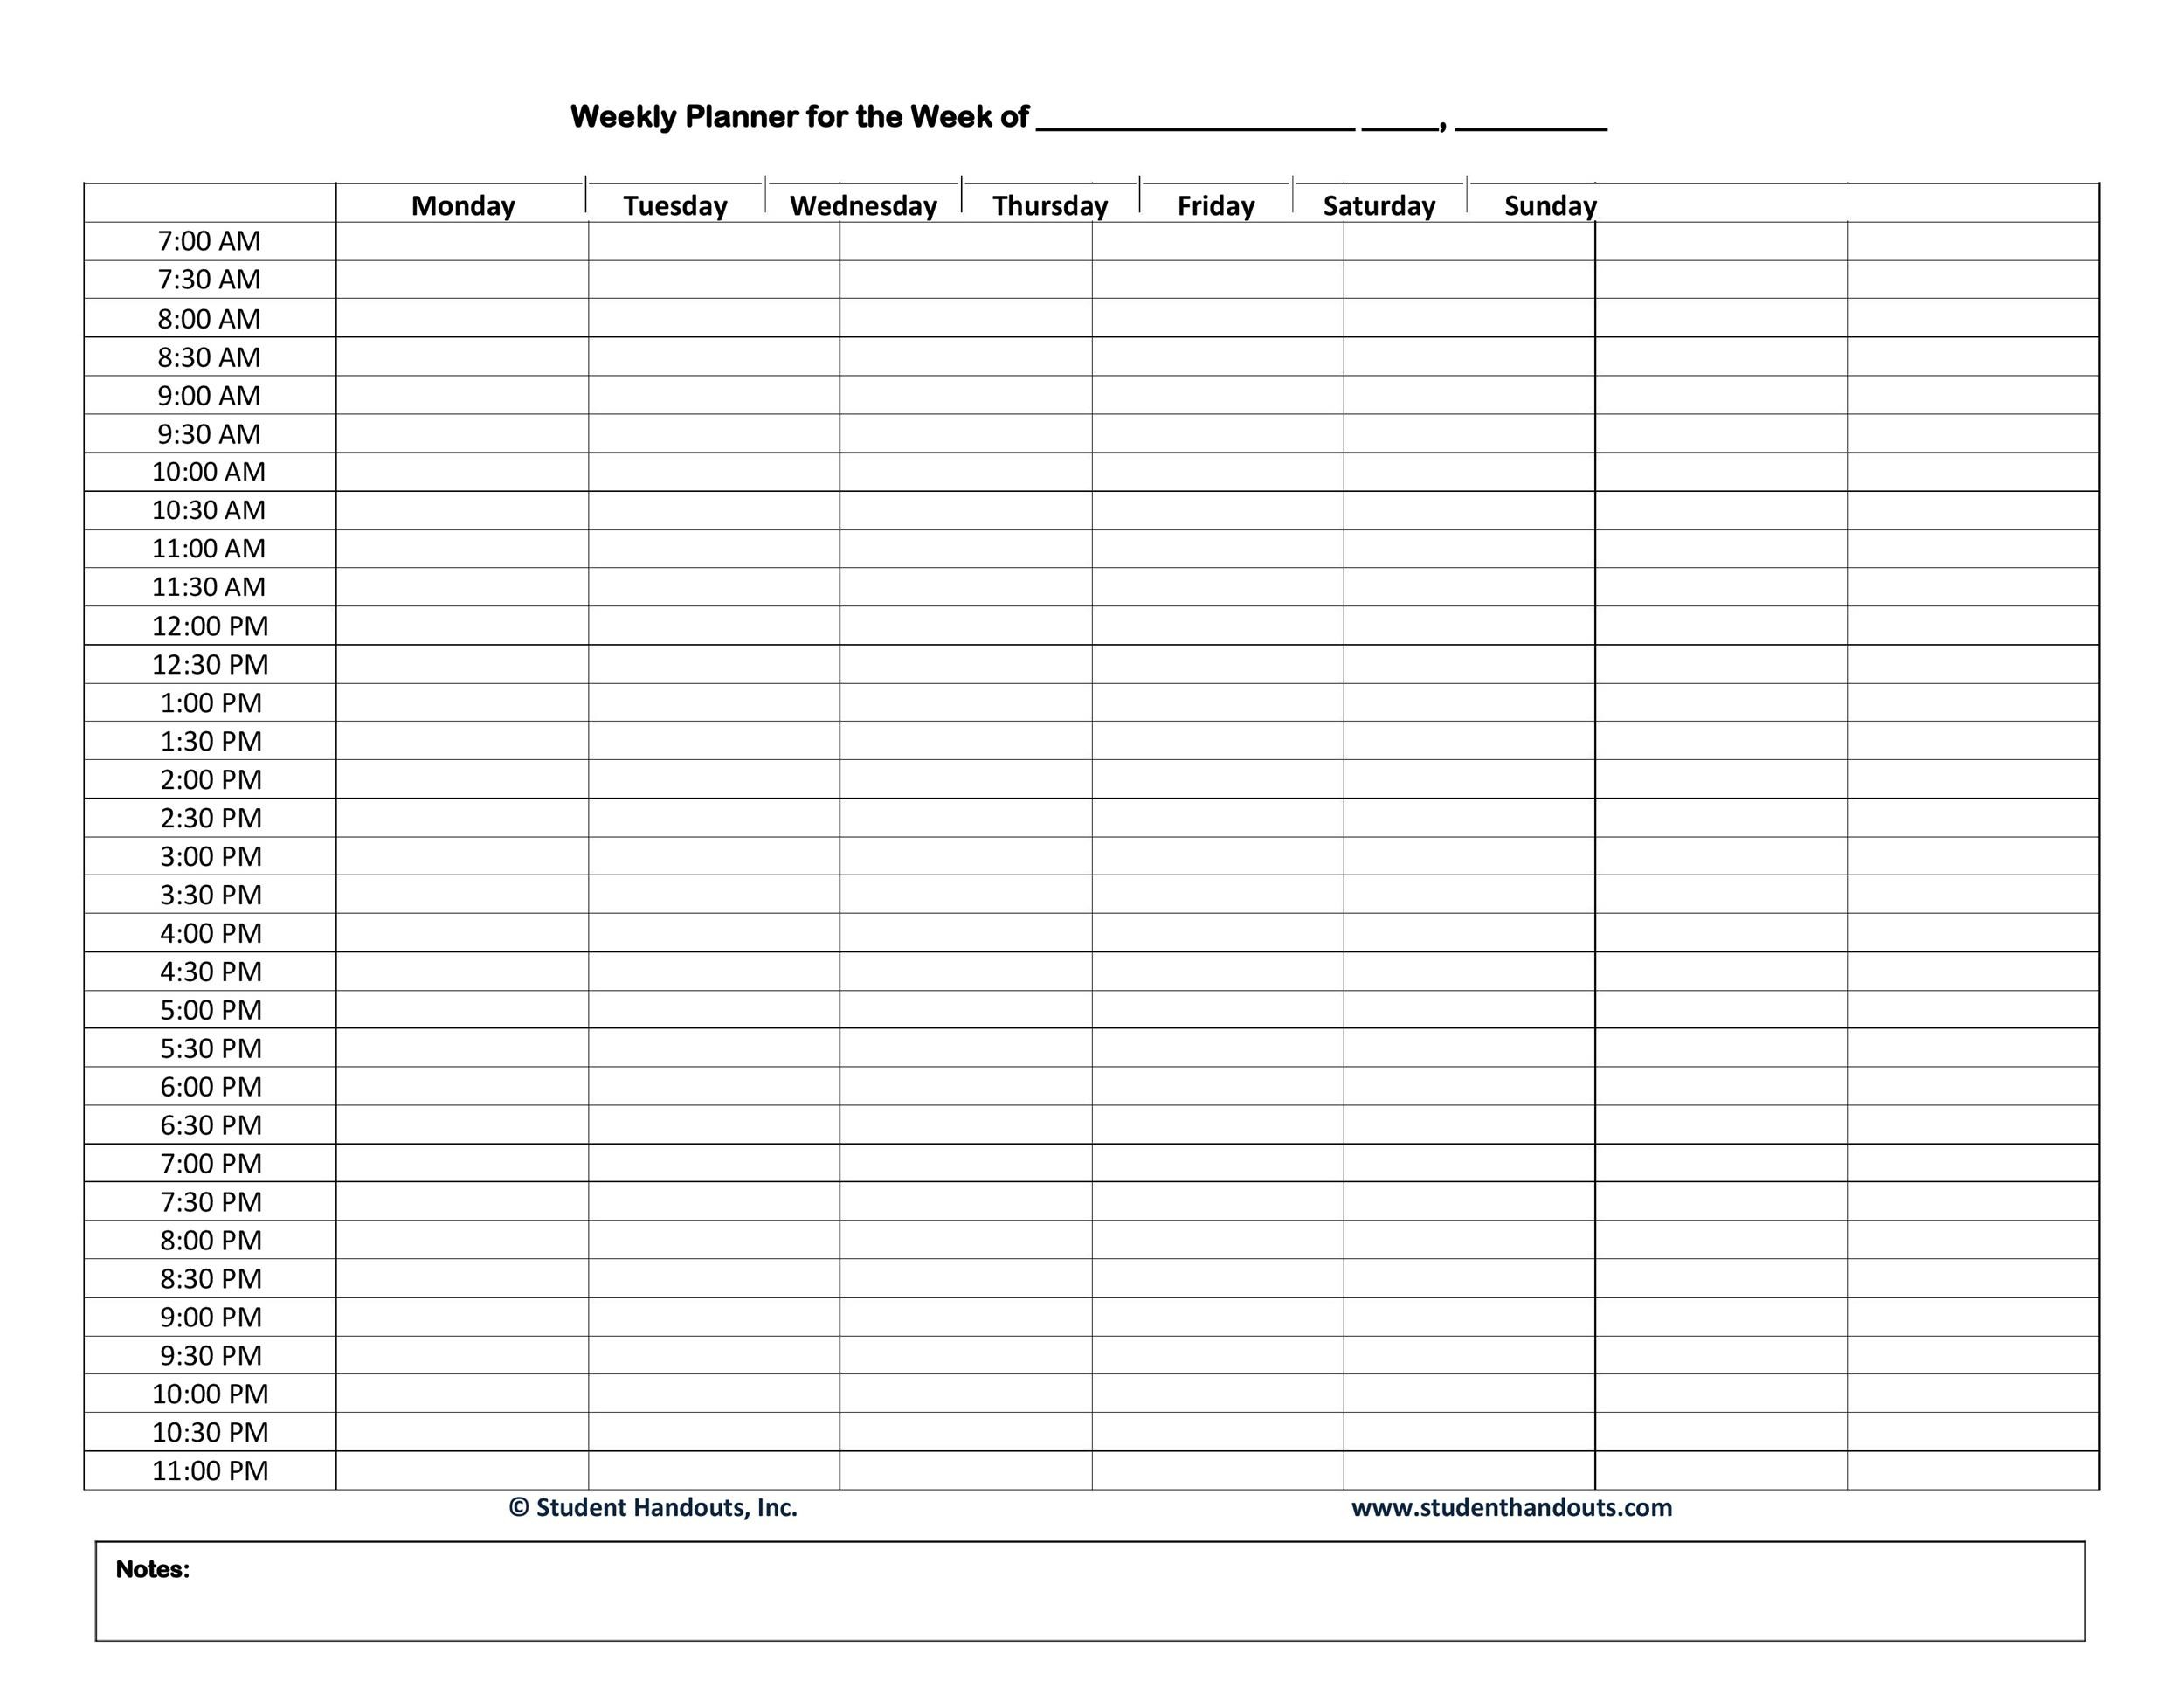 43 Effective Hourly Schedule Templates Excel Ms Word E19085 1